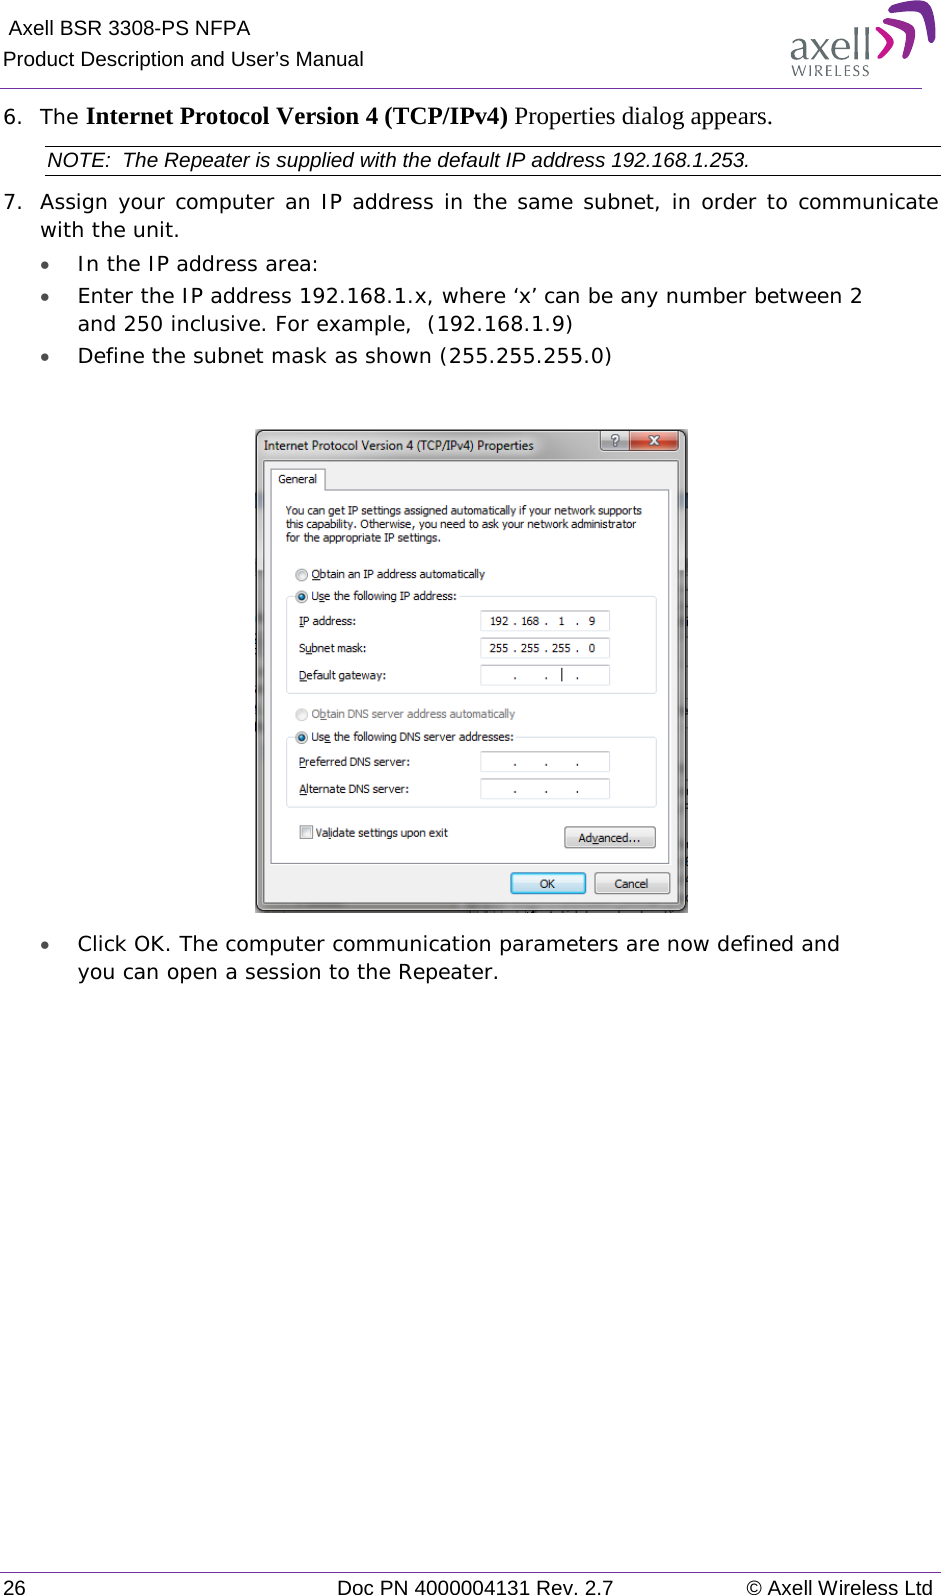  Axell BSR 3308-PS NFPA Product Description and User’s Manual 26 Doc PN 4000004131 Rev. 2.7 © Axell Wireless Ltd  6.  The Internet Protocol Version 4 (TCP/IPv4) Properties dialog appears. NOTE:  The Repeater is supplied with the default IP address 192.168.1.253. 7.  Assign your computer an IP address in the same subnet, in order to communicate with the unit.  • In the IP address area: • Enter the IP address 192.168.1.x, where ‘x’ can be any number between 2 and 250 inclusive. For example,  (192.168.1.9)  • Define the subnet mask as shown (255.255.255.0)   • Click OK. The computer communication parameters are now defined and you can open a session to the Repeater. 